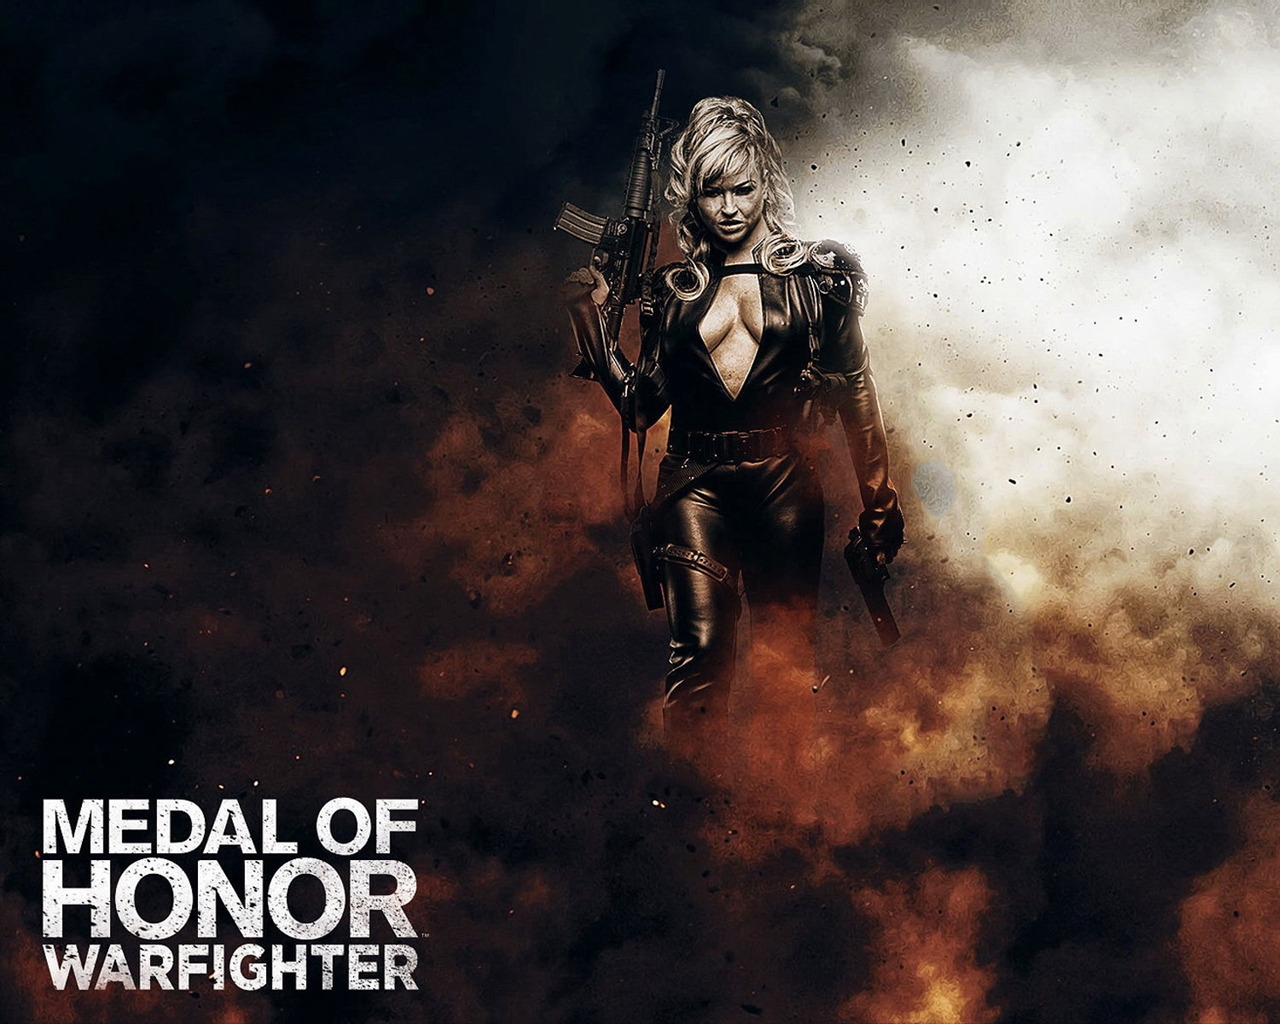 Medal of Honor Warfighter Girl for 1280 x 1024 resolution